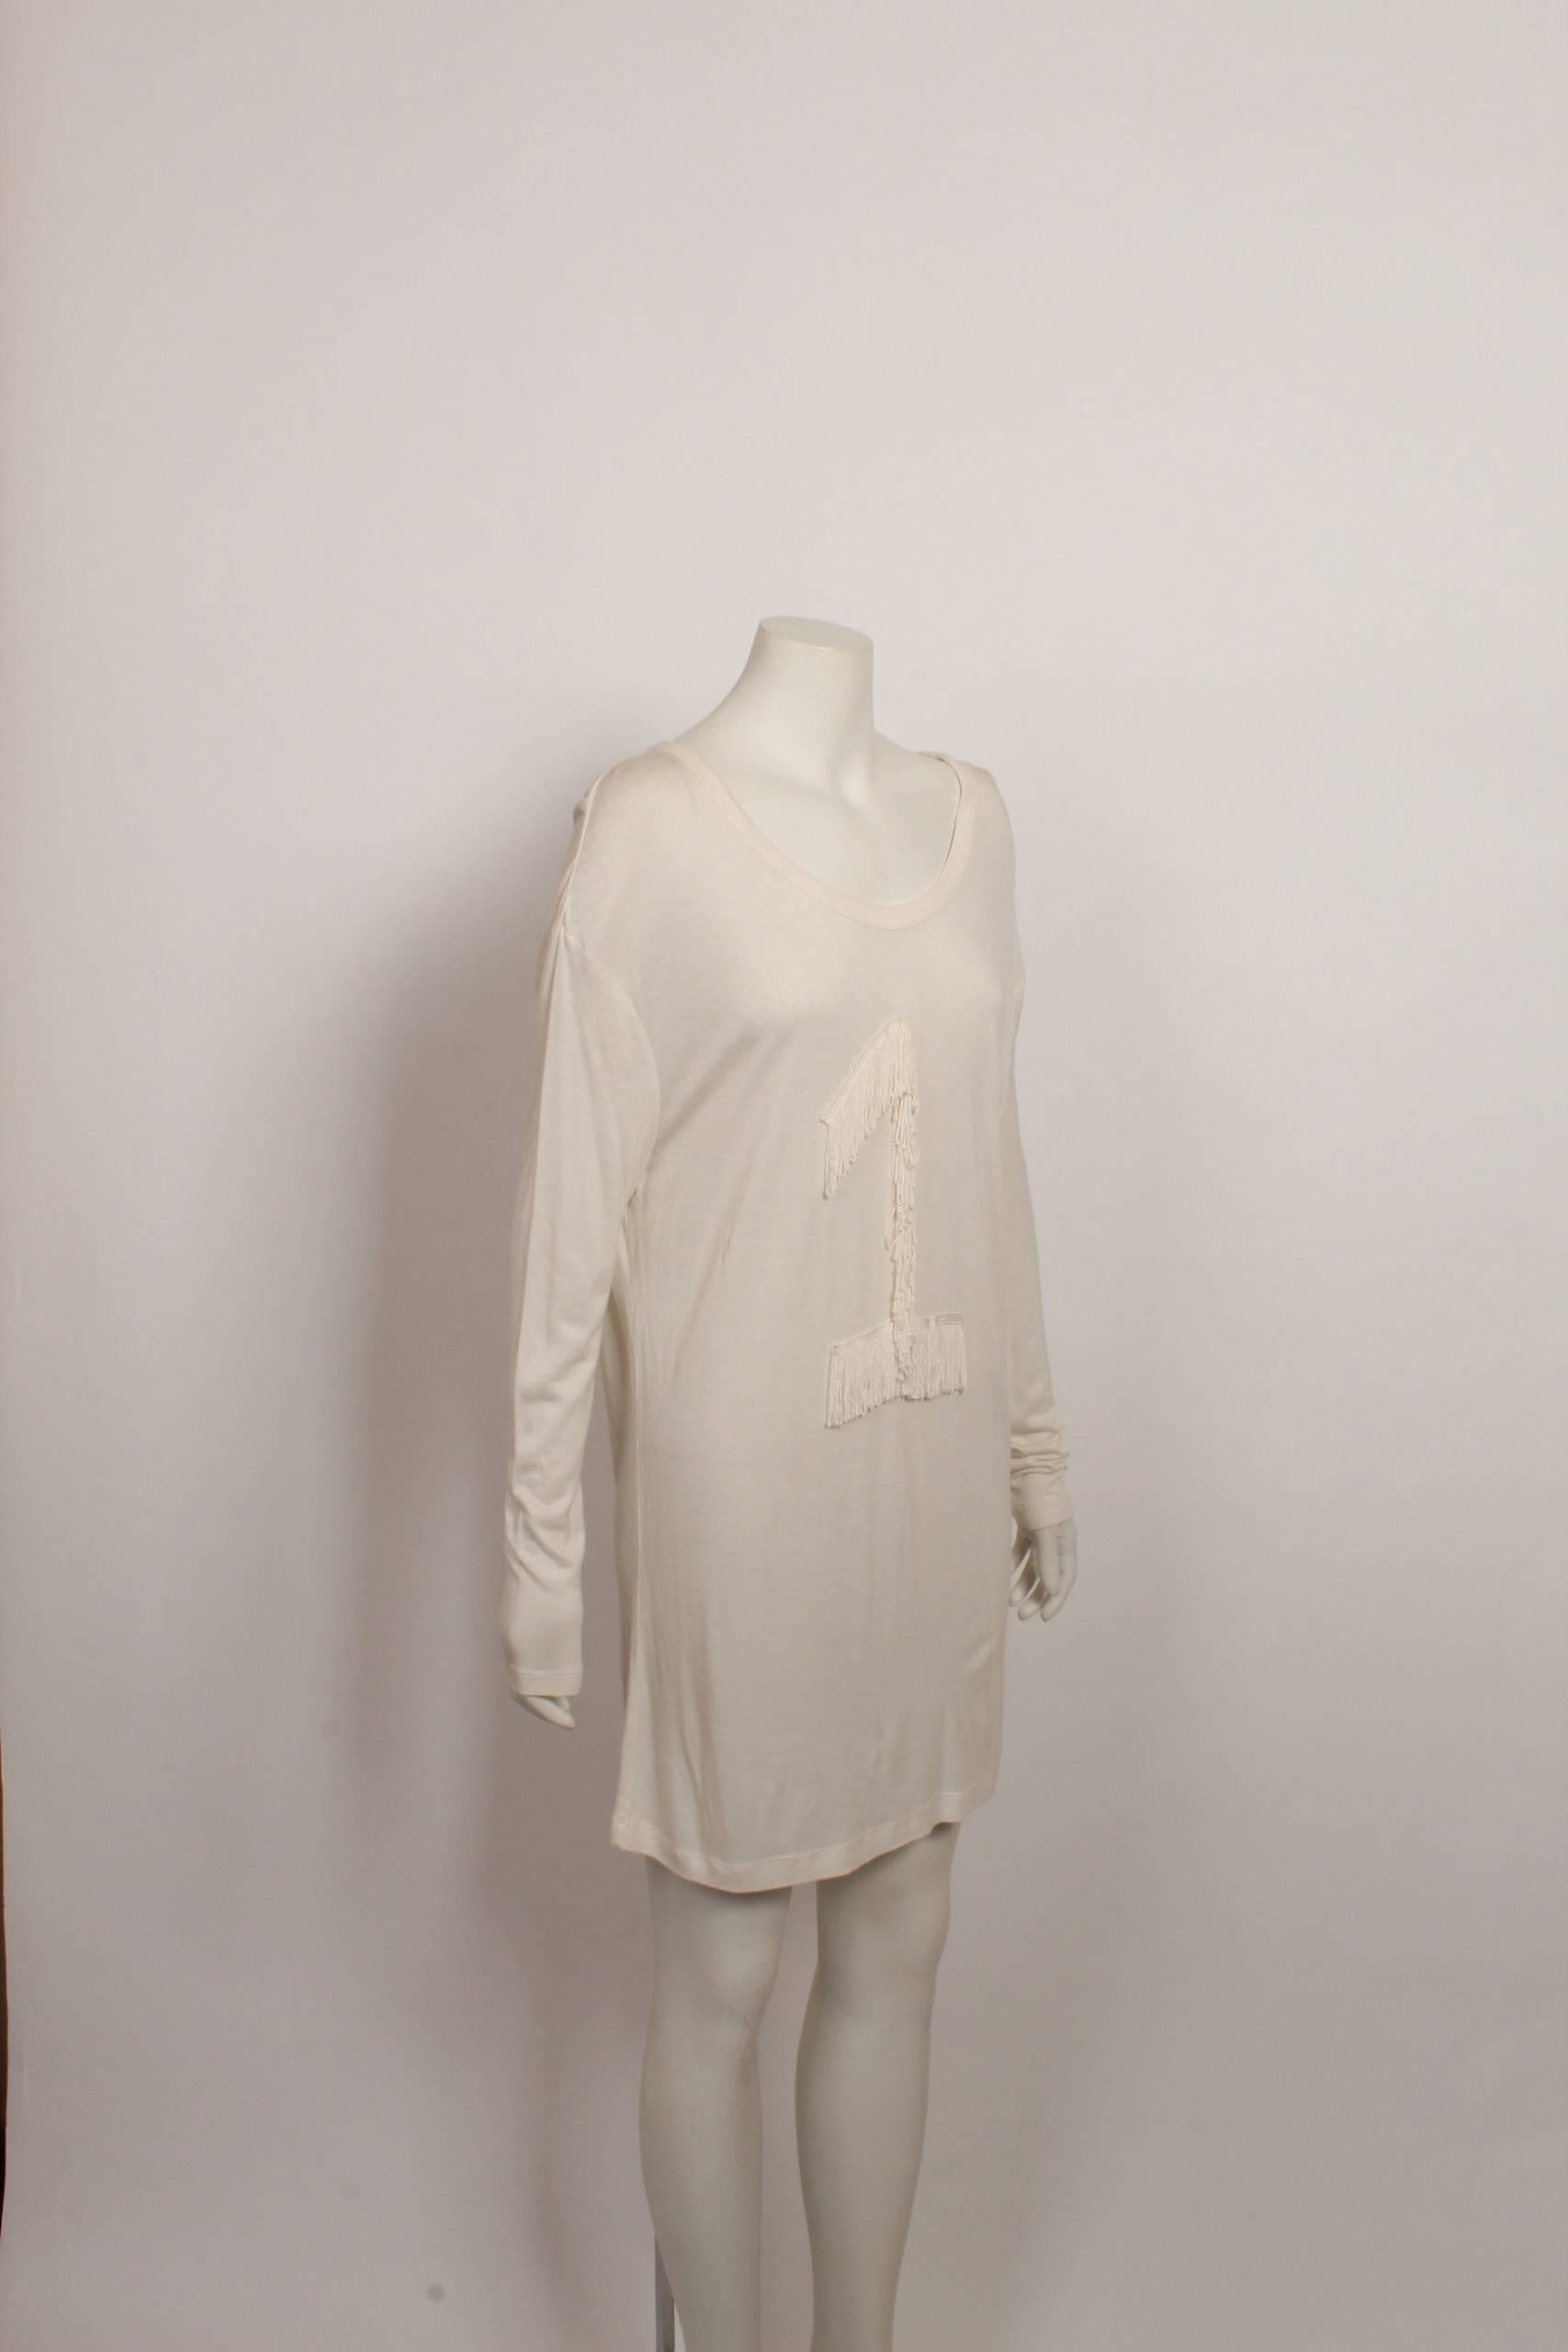 LINE # 4:
Garde-robe pour femme. A wardrobe for women.  Essentially women’s wardrobe basics, though explained as “a personal approach to dress, fixed on taste rather than on a seasonal approach to design, or a particular age group.”  
[Oct. 2003 for